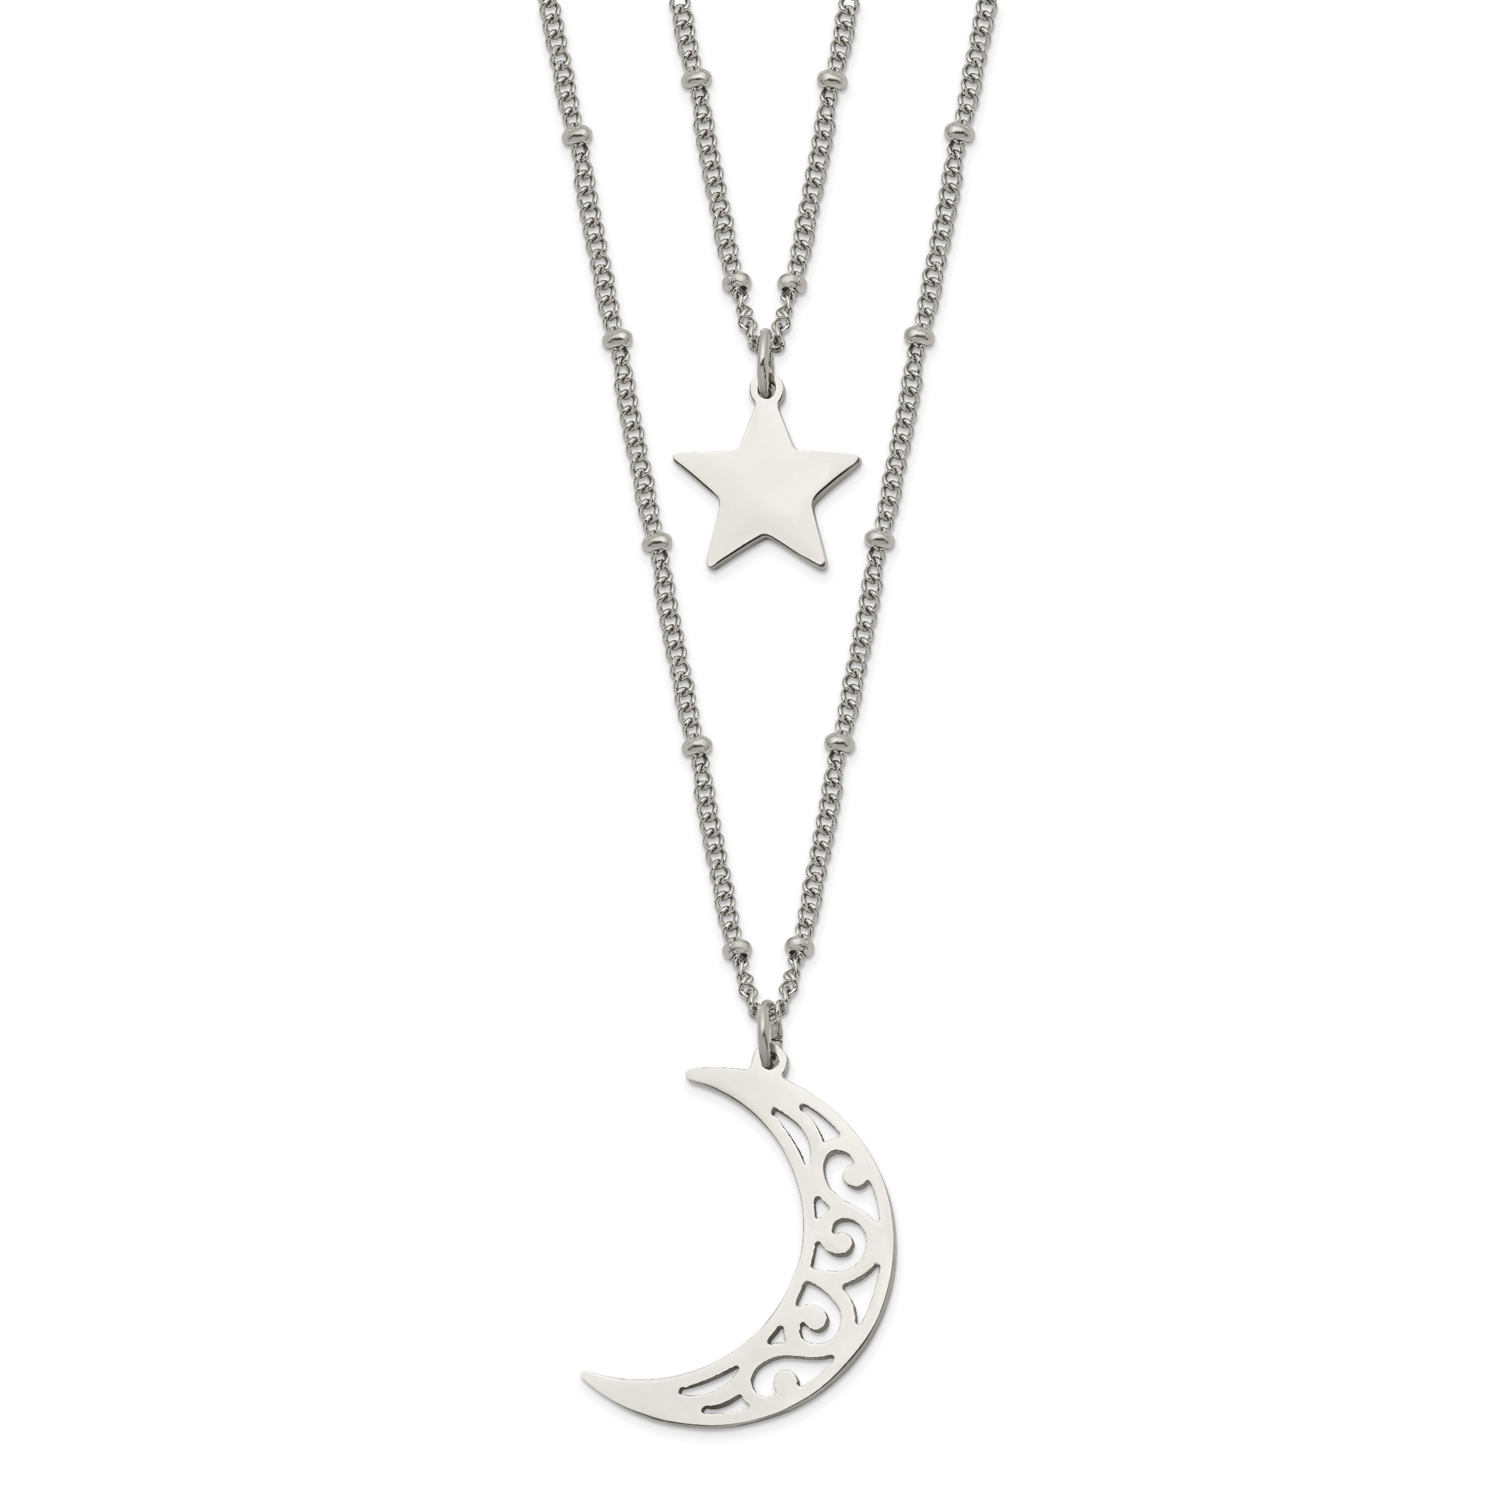 2 Strand Beaded Star and Moon 30 Inch ch Necklace Stainless Steel Polished SRN2490-30